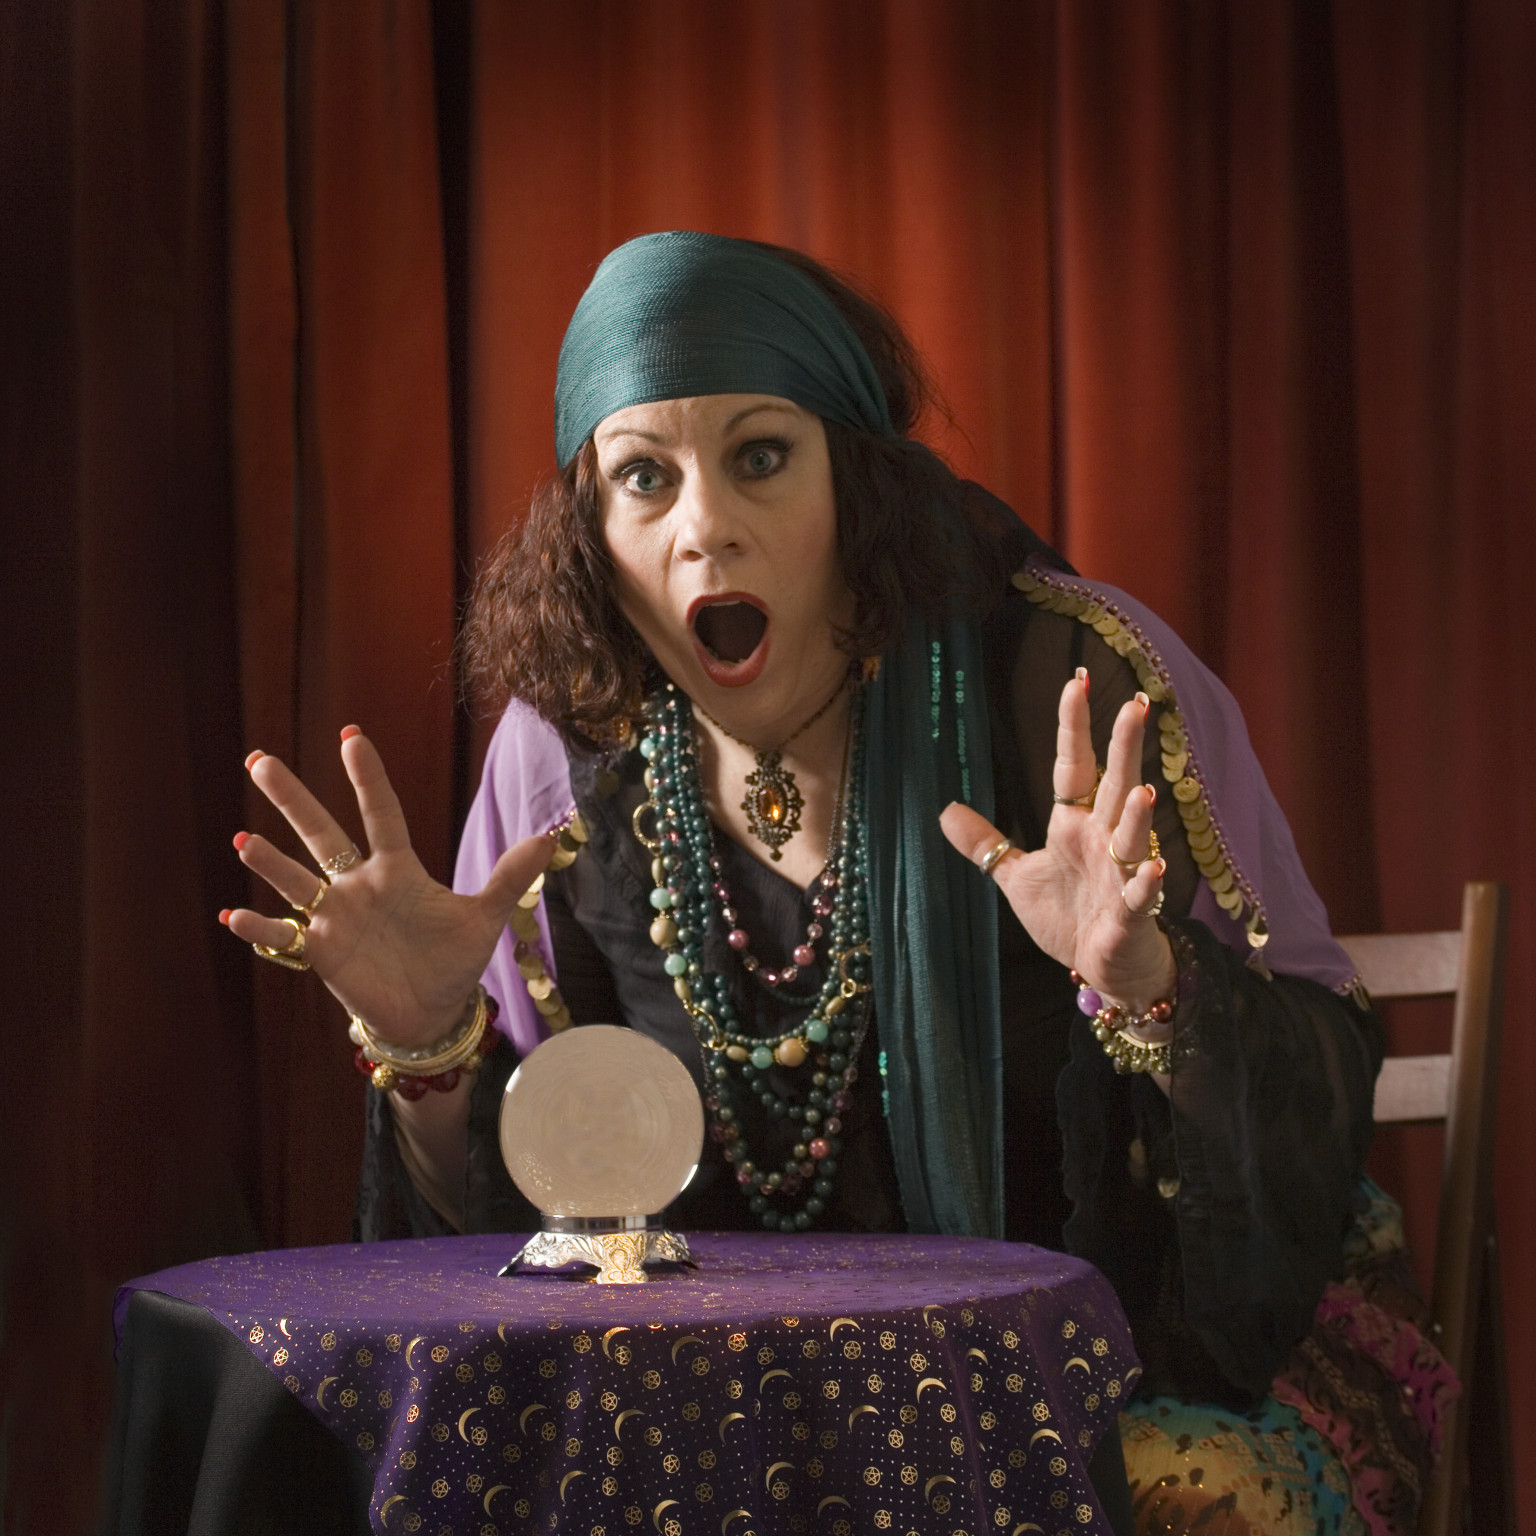 Female fortune teller with crystal ball, mouth open, portrait.